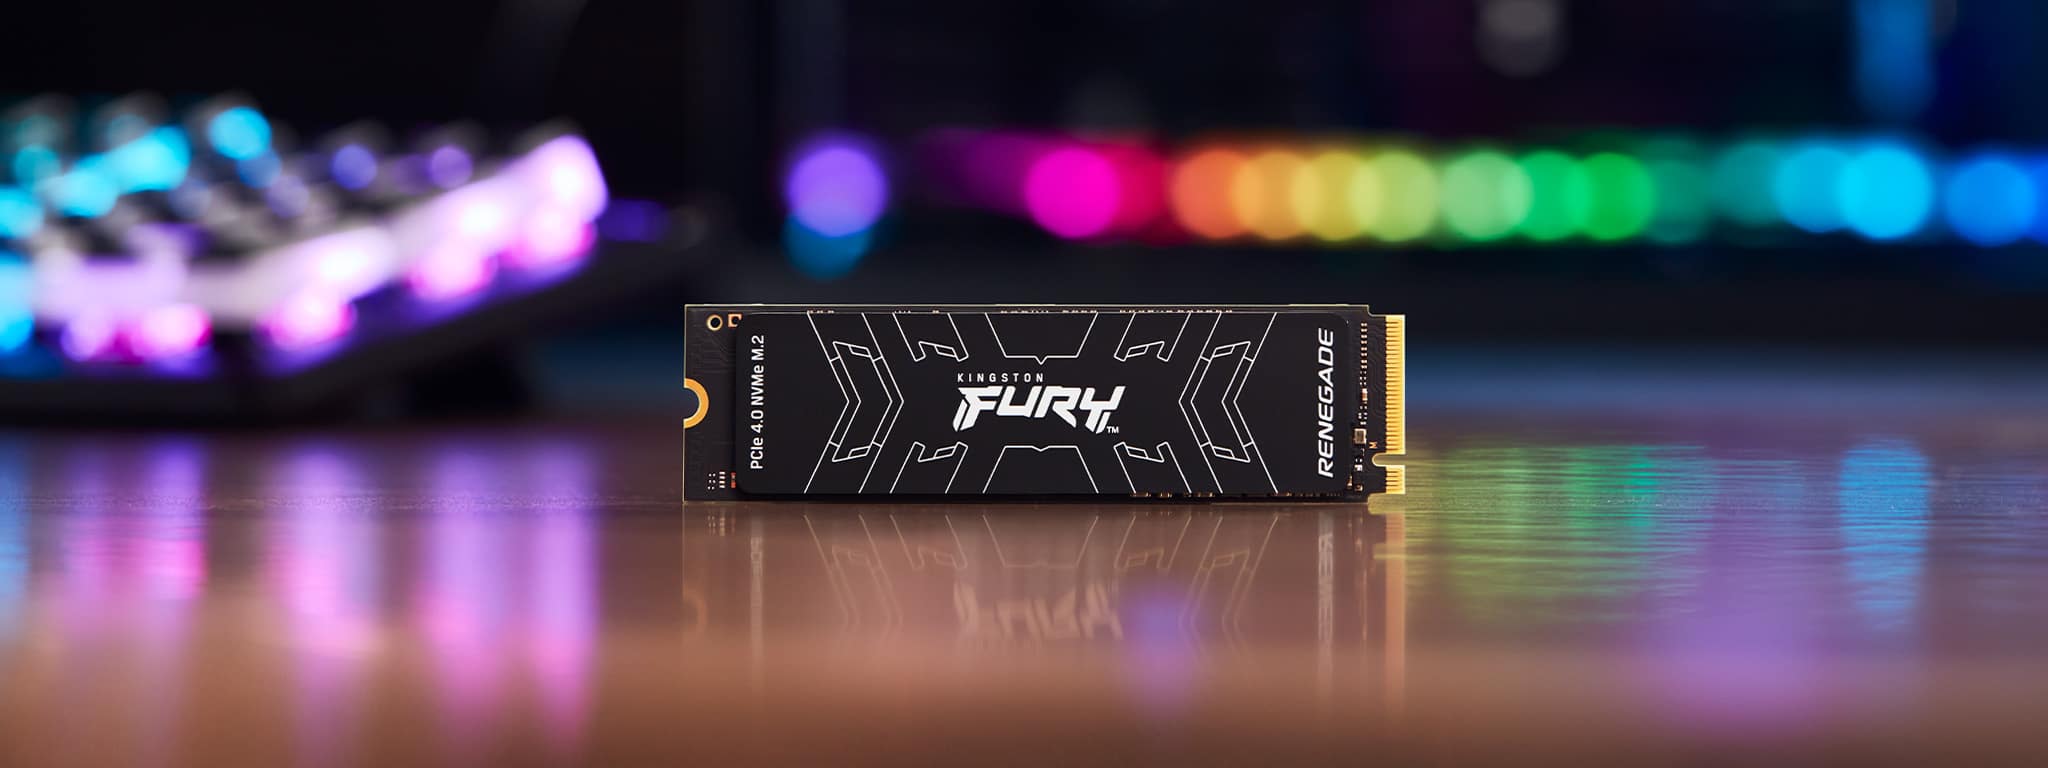 Kingston delights us with its impressive FURY Renegade SSD -